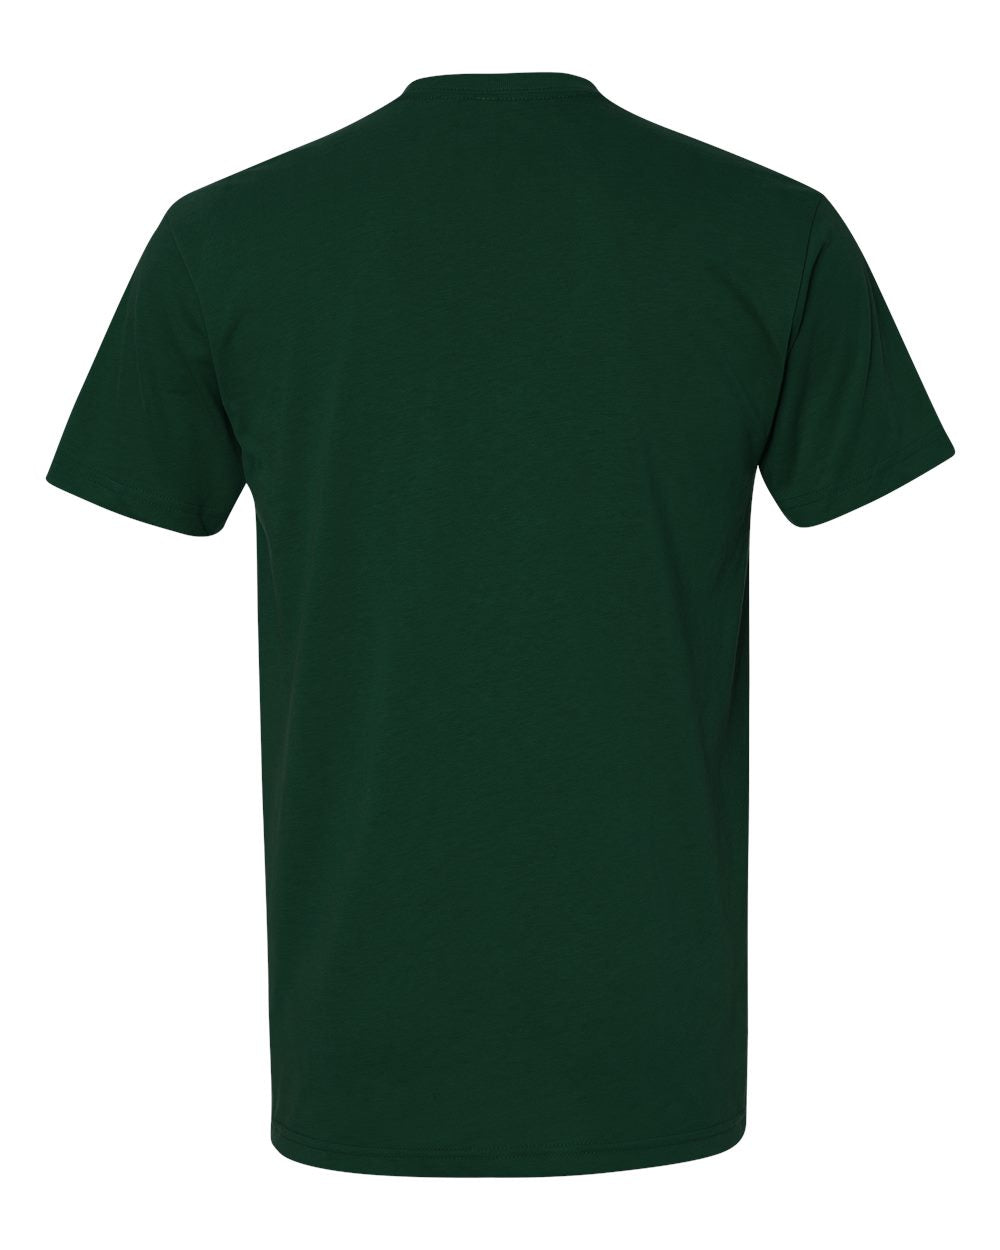 Next Level Tee 3600 - Forest Green